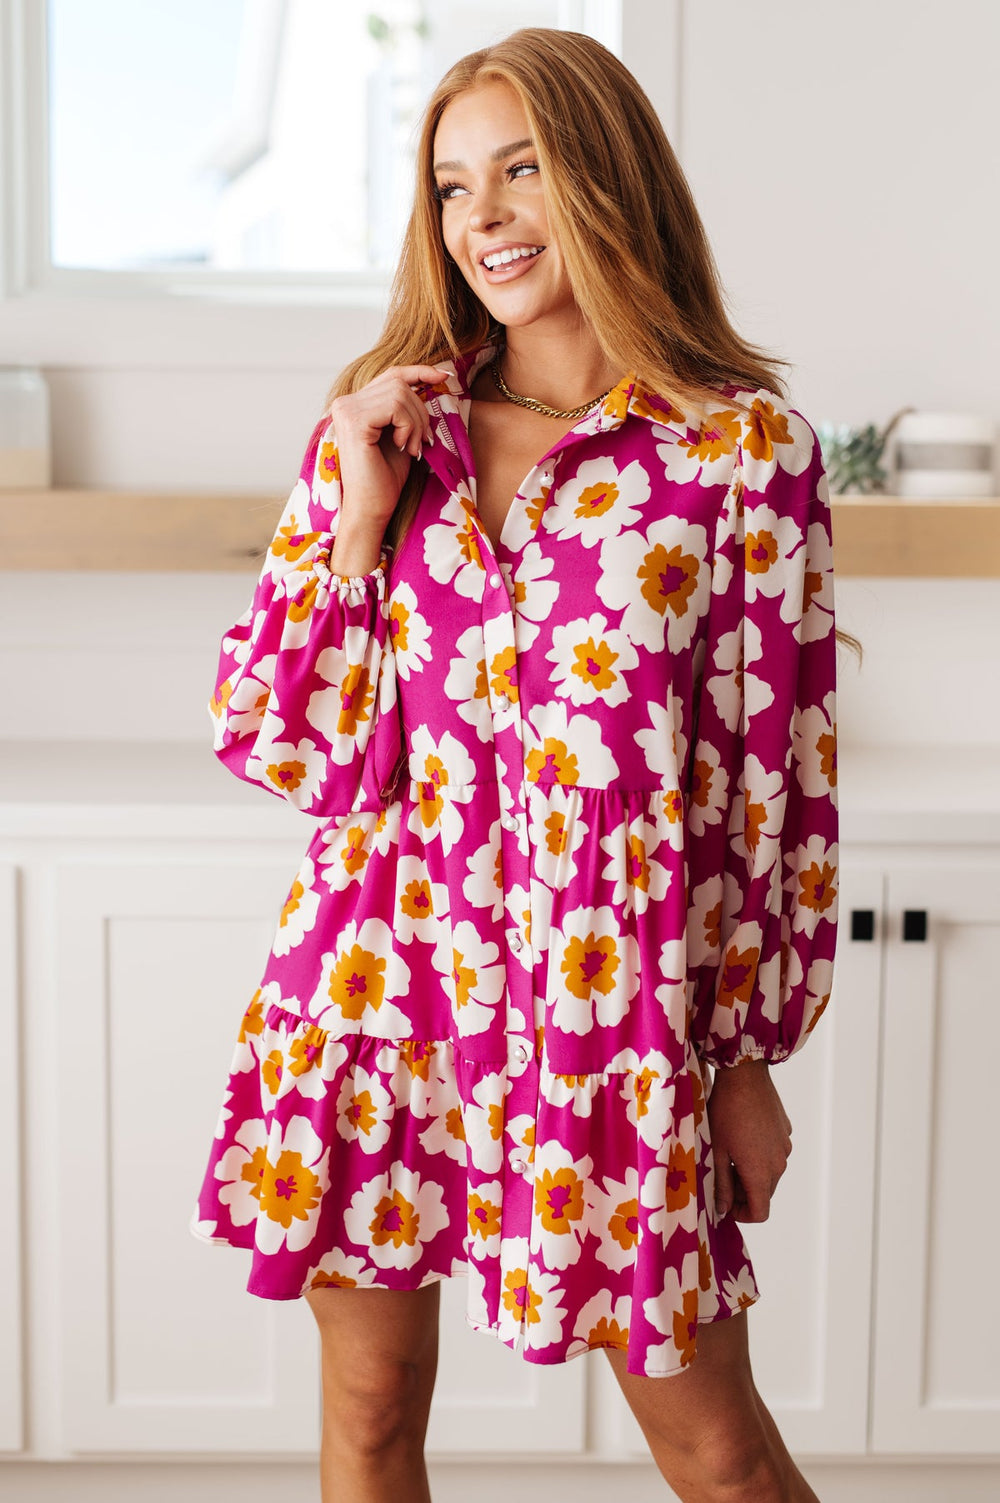 Bold Floral Shirt Dress - 70s inspired - Inspired Eye Boutique